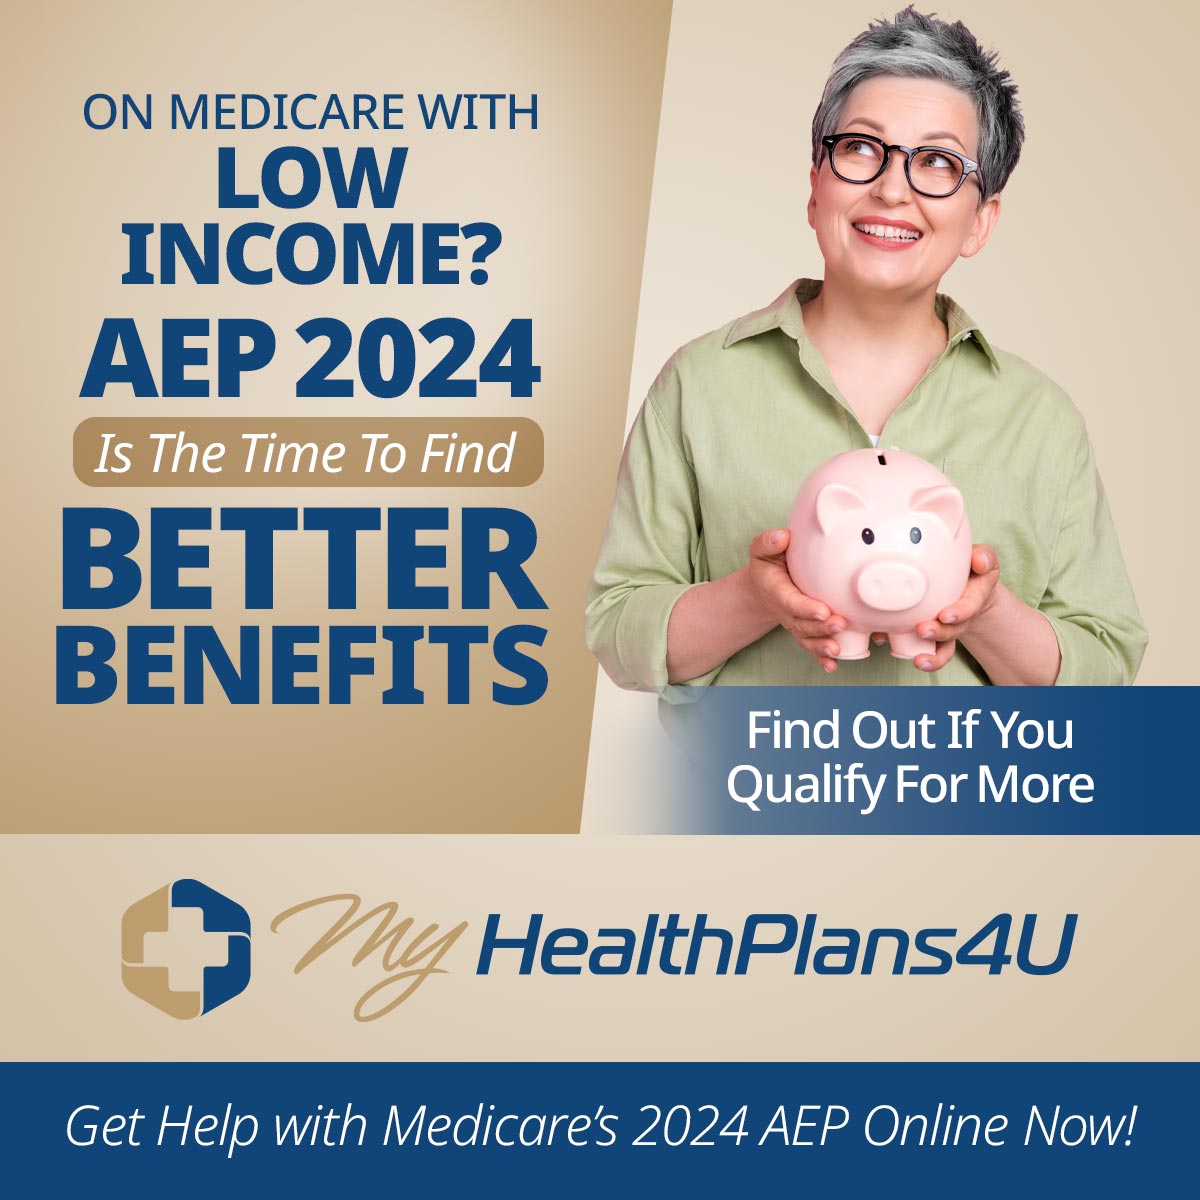 On Medicare with Low Income? AEP 2024 is the time to find better benefits. Find out if you qualify for more. My Health Plans 4 U. Get help with Medicare's 2024 AEP online now!